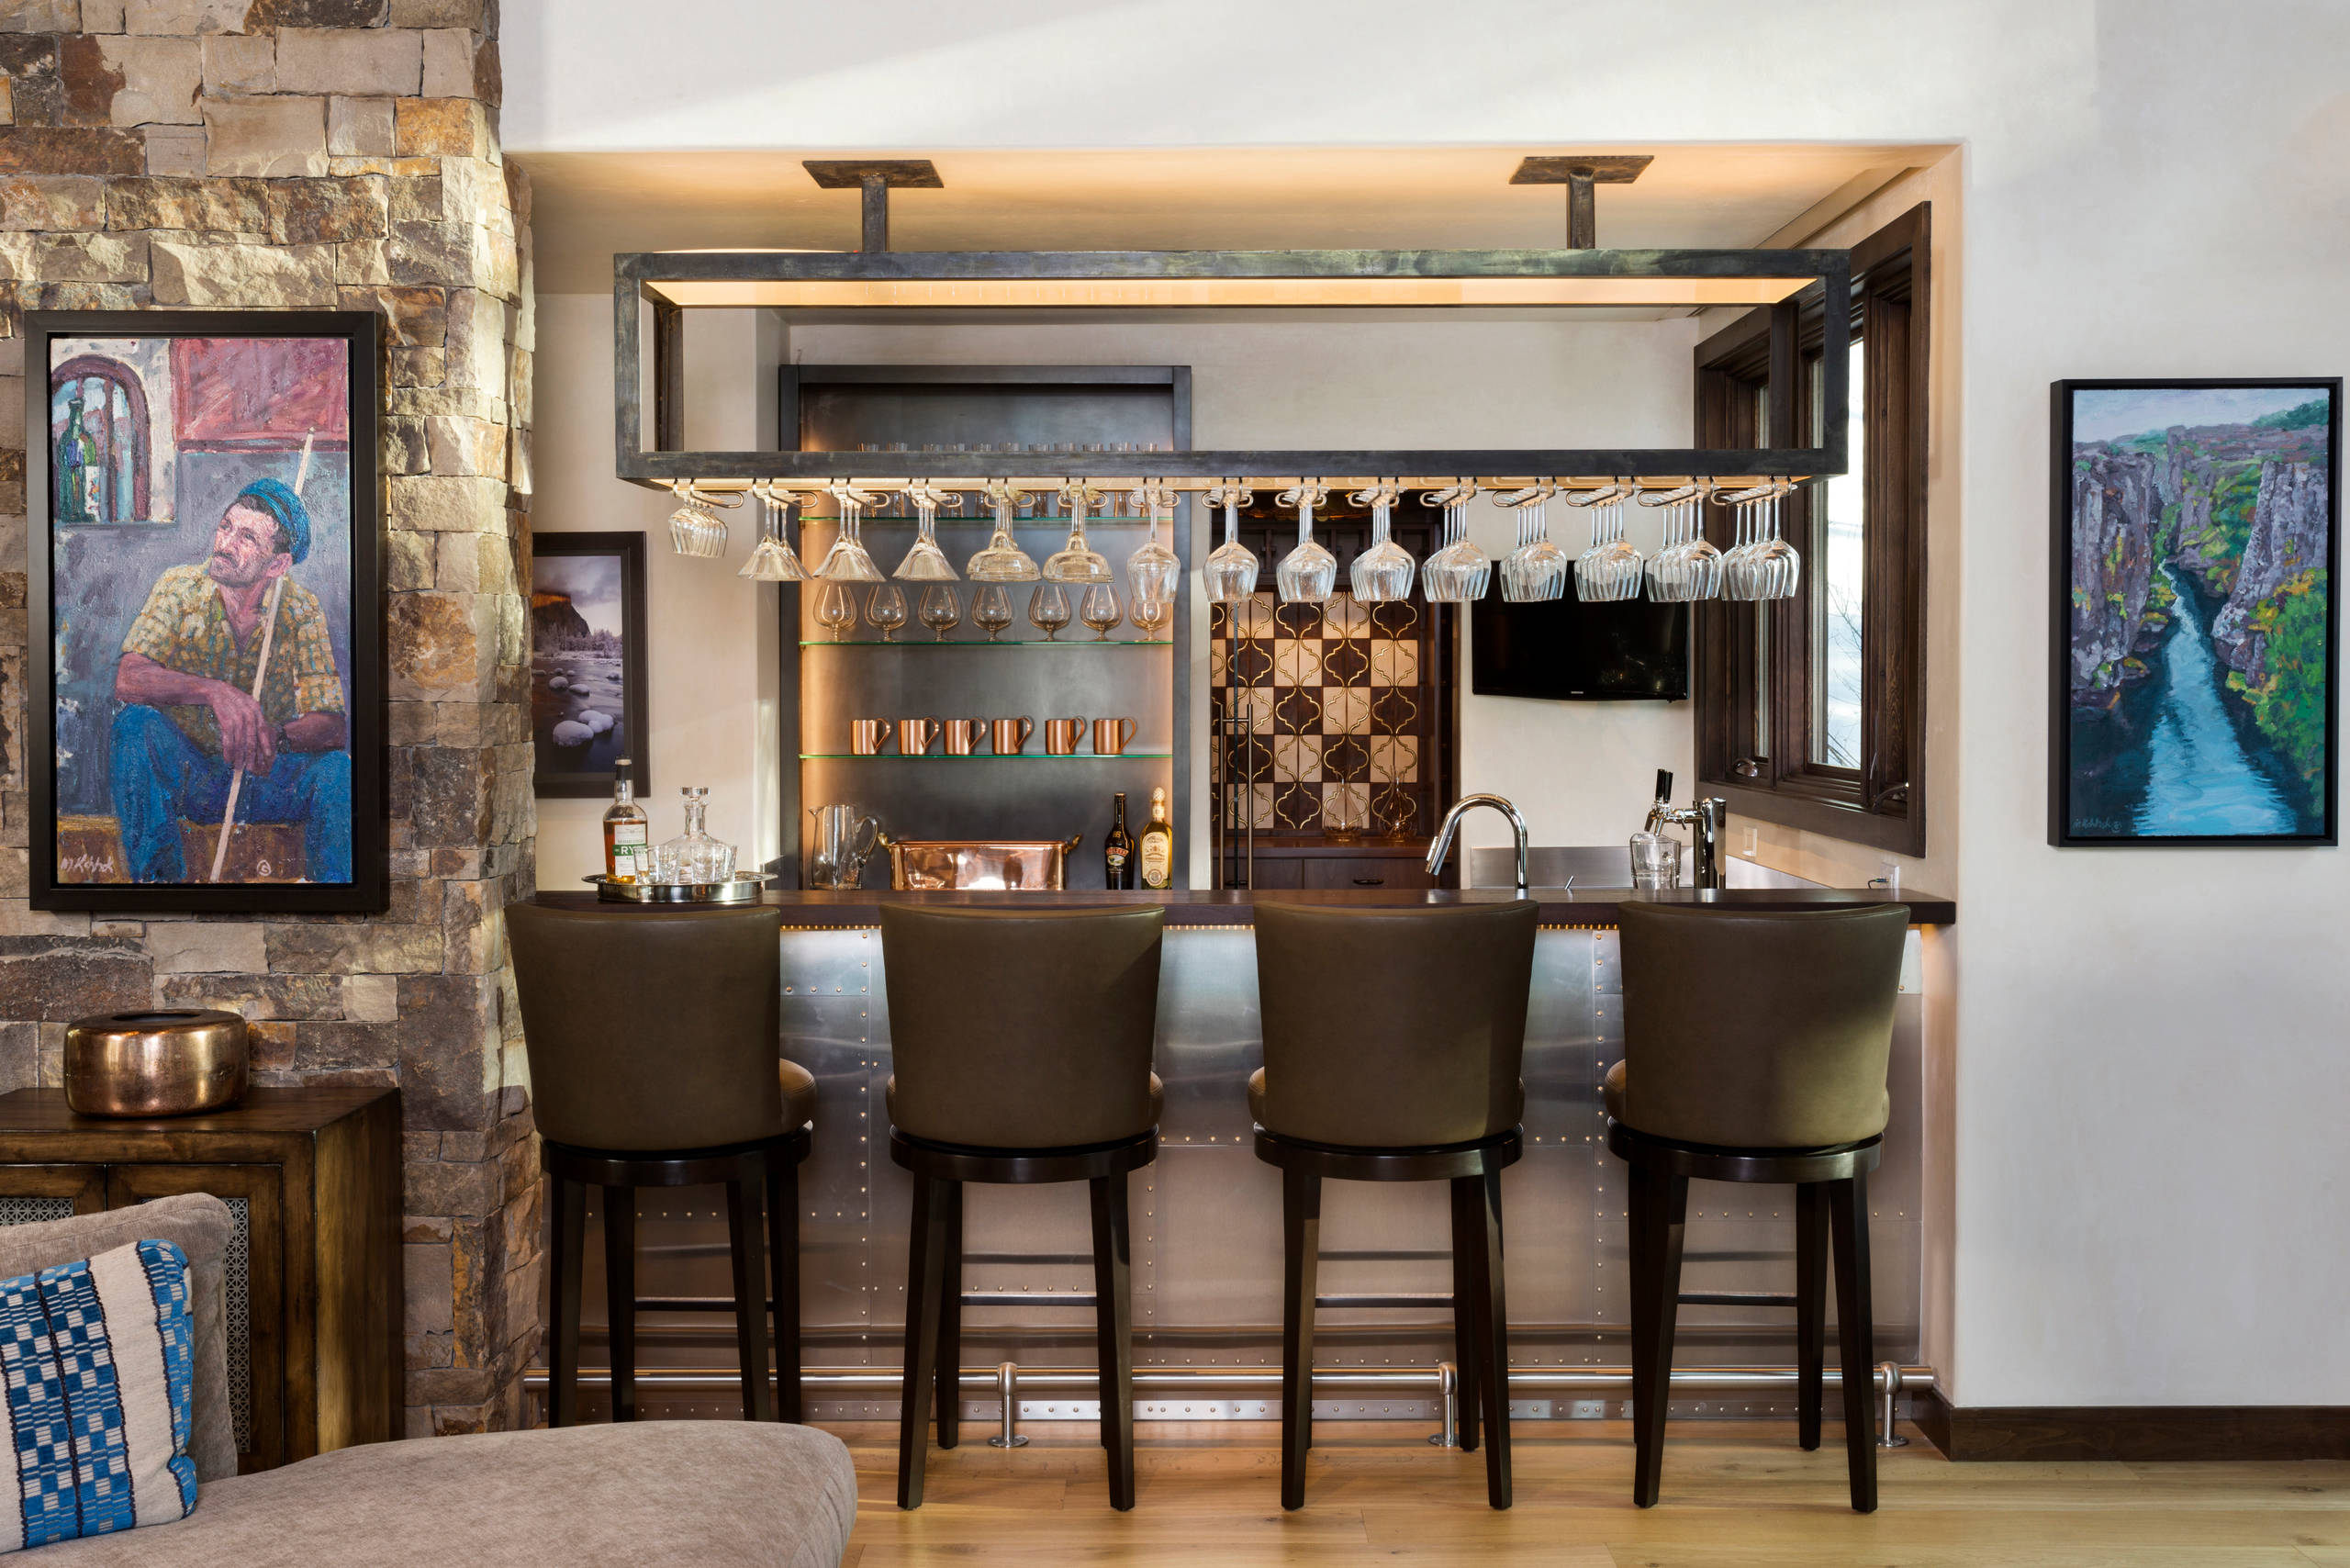 15 Distinguished Rustic Home Bar Designs For When You Really Need That ...